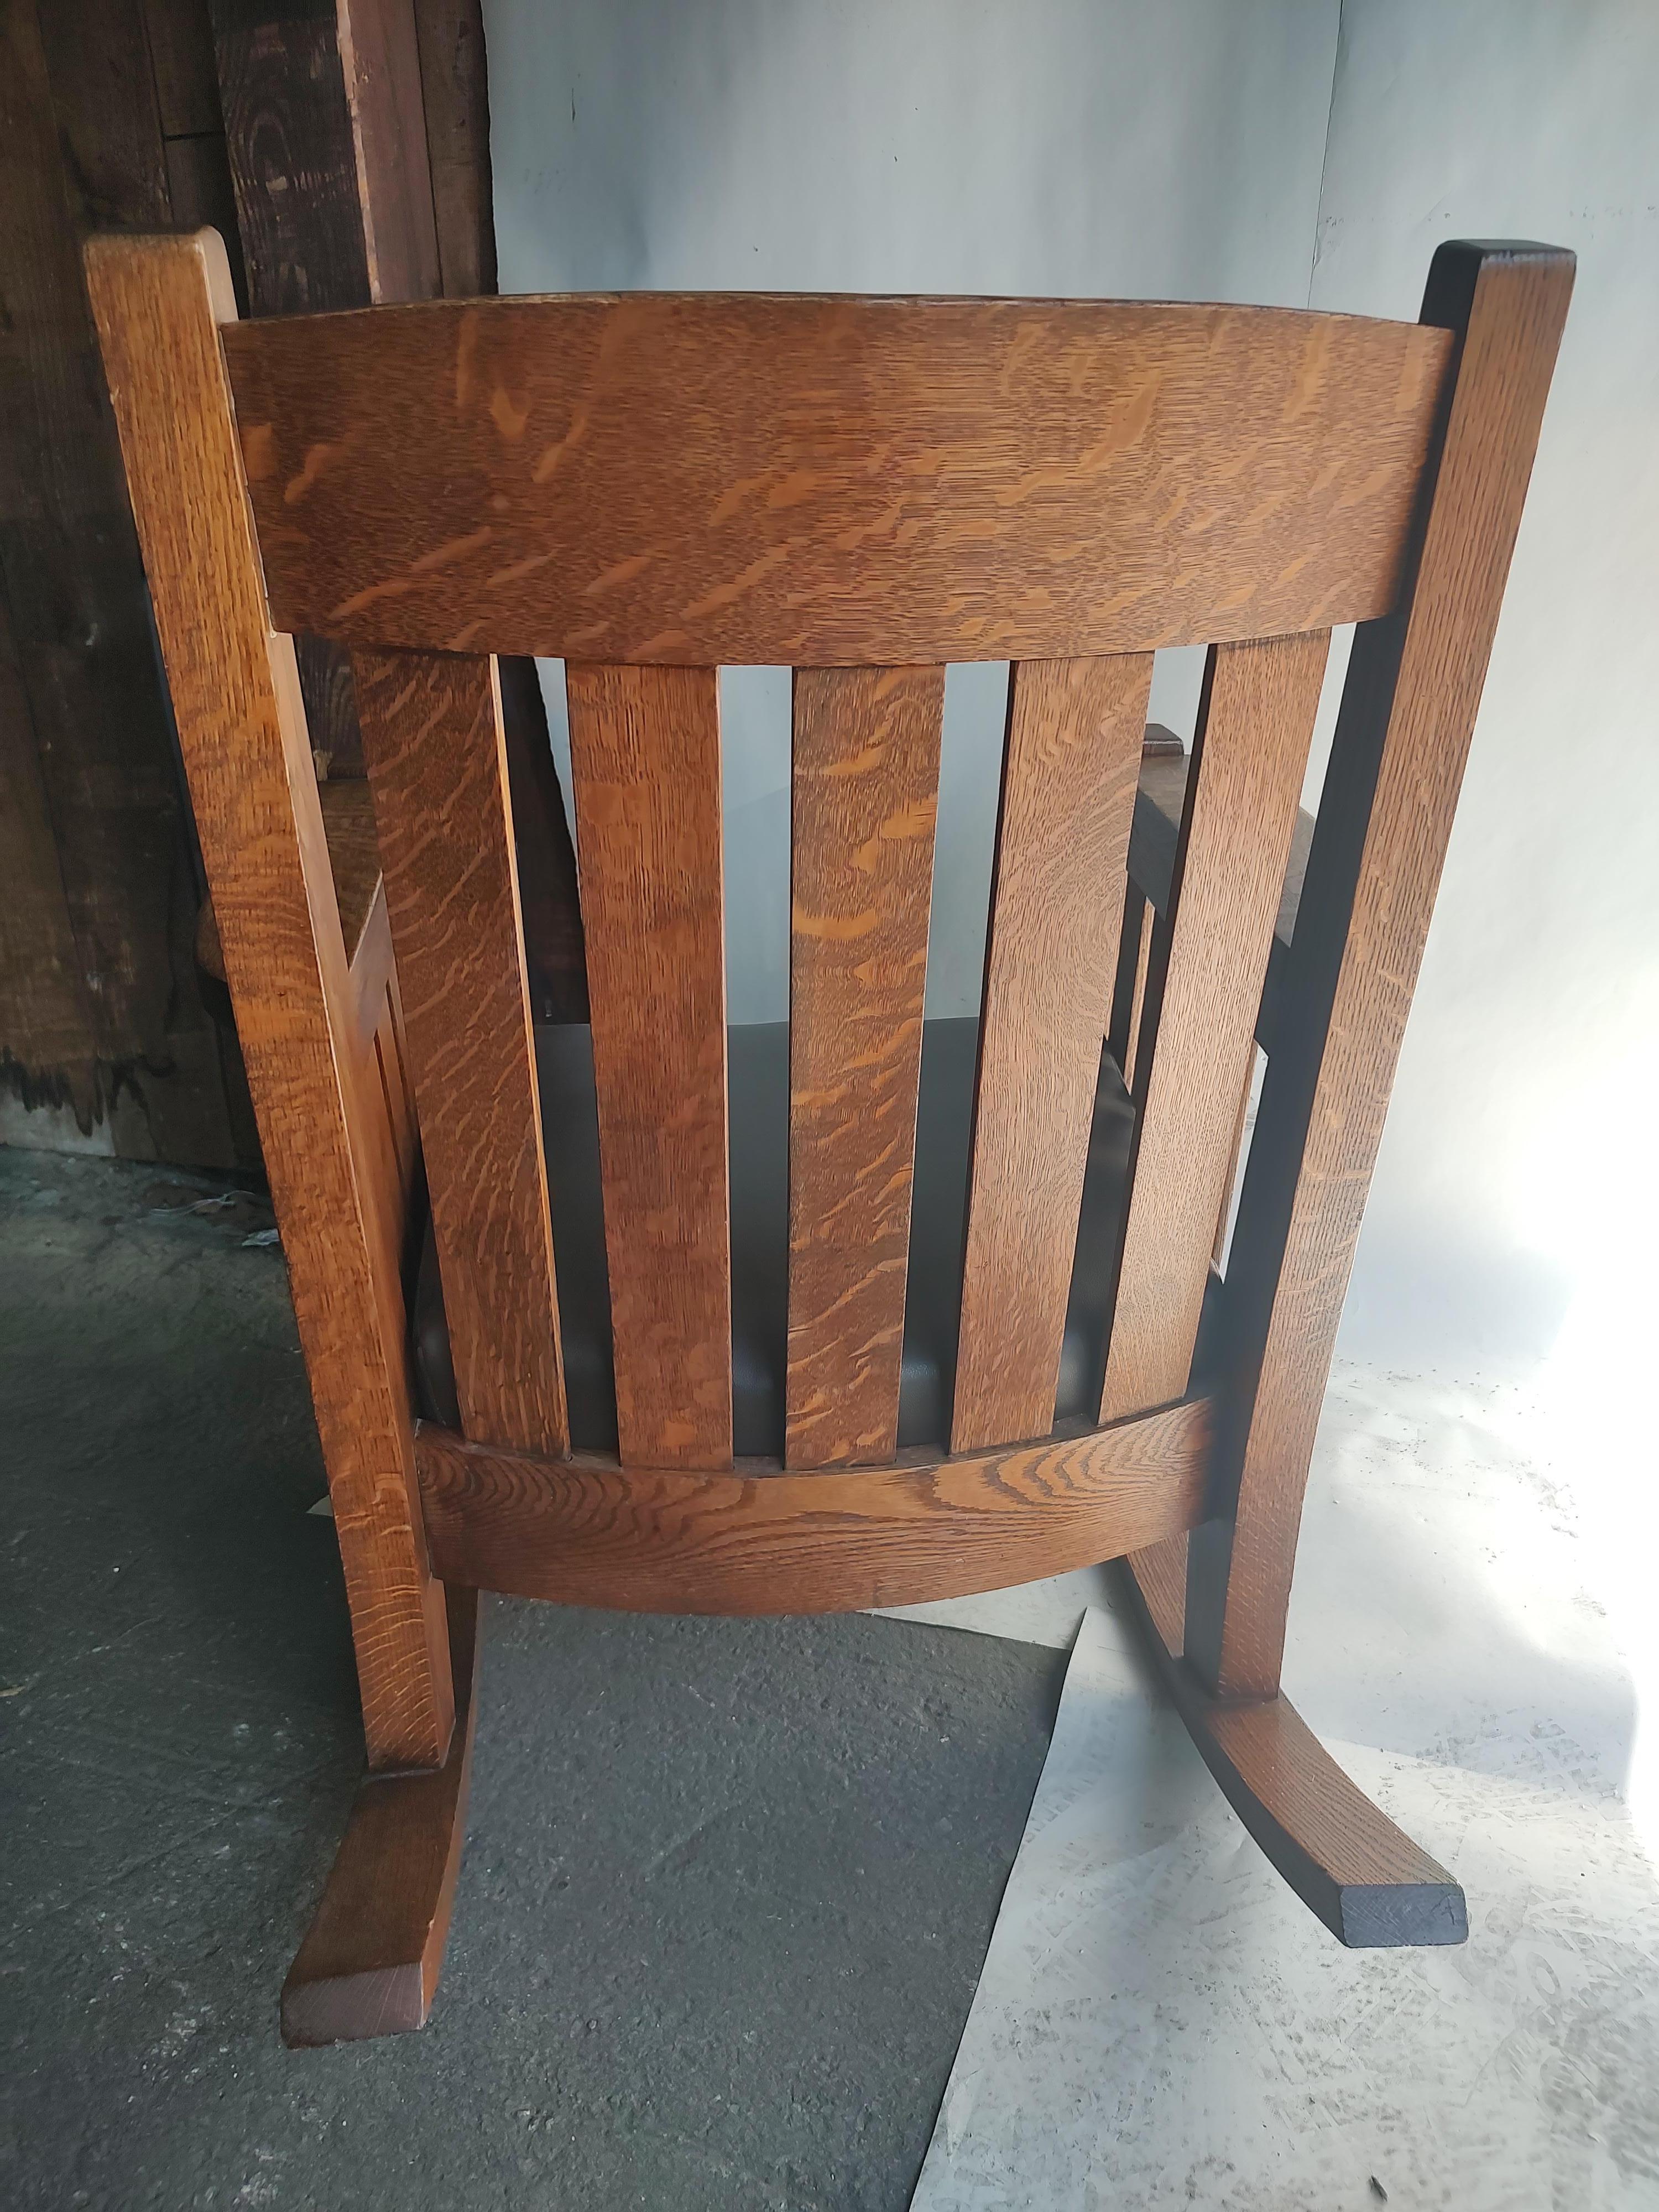 Stained Arts & Crafts Mission Quarter Sawn Oak Rocking Chair by Harden, circa 1905